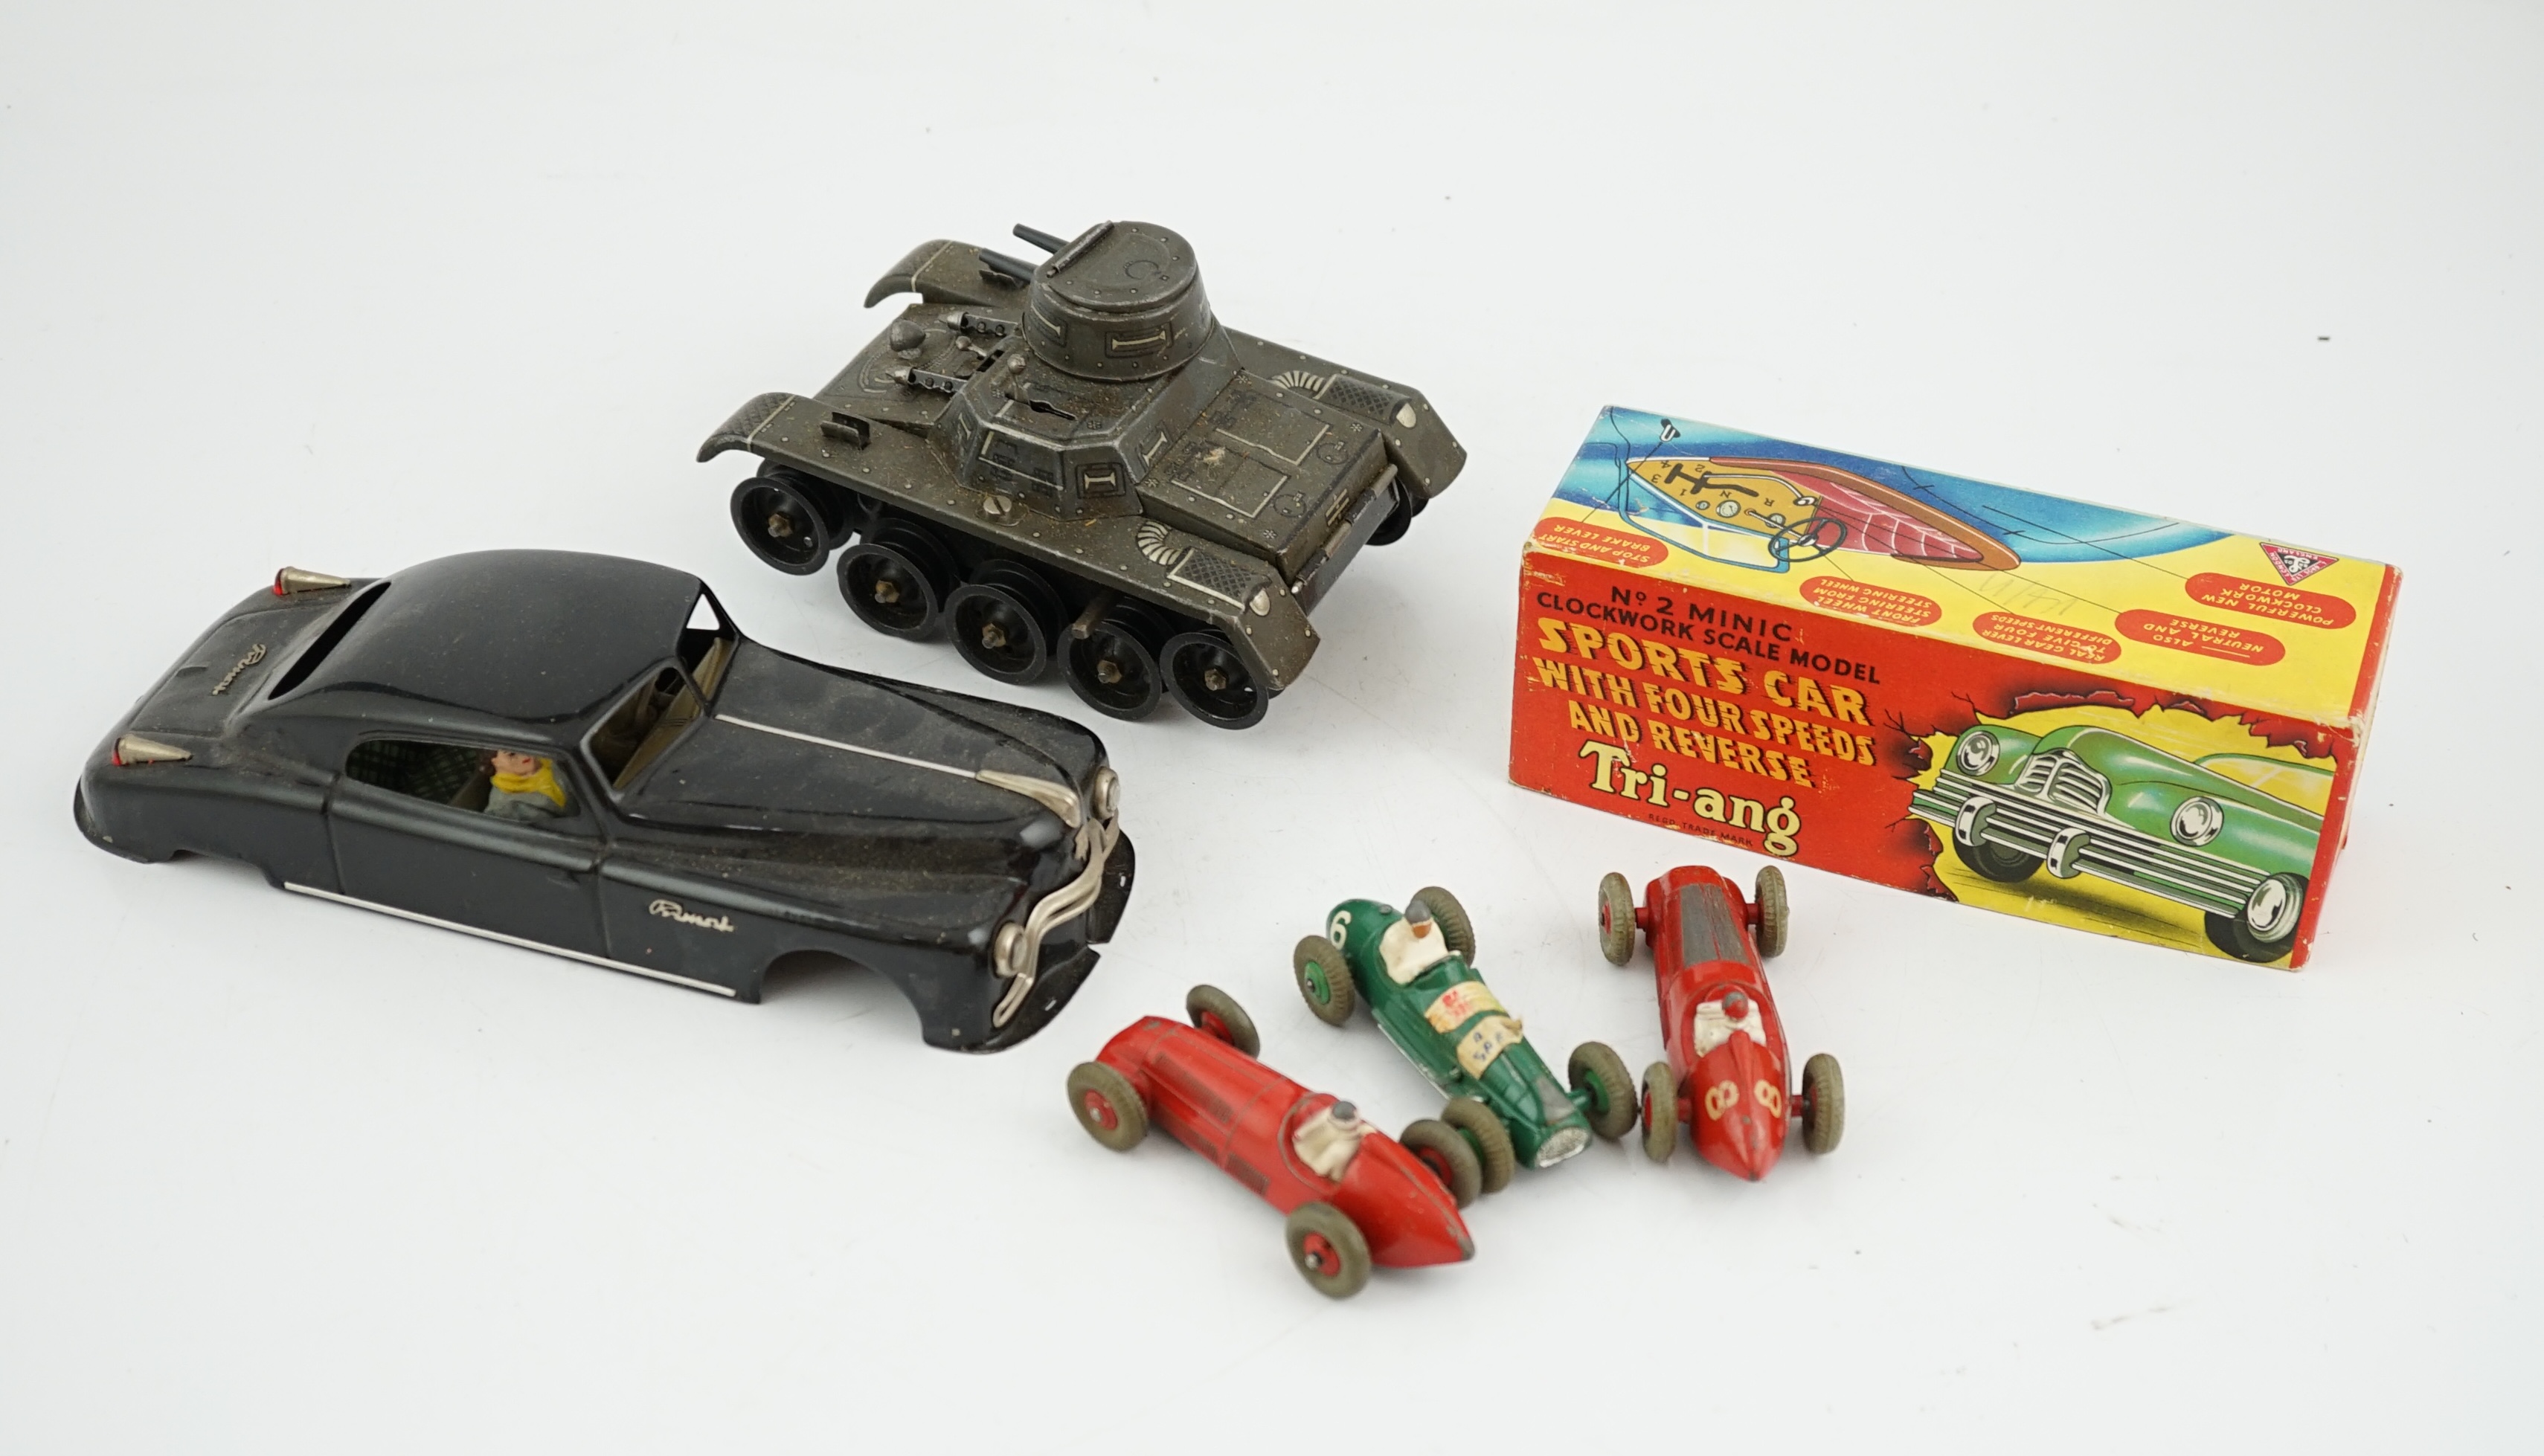 Eleven tinplate and diecast vehicles by Dinky Toys, Tri-ang, Gama, etc., including a Primal Arnold tinplate remote controlled car, a Tri-ang Minic Sports car with four speeds, a Gama Montage Tank, a Tri-ang Minic Armoure